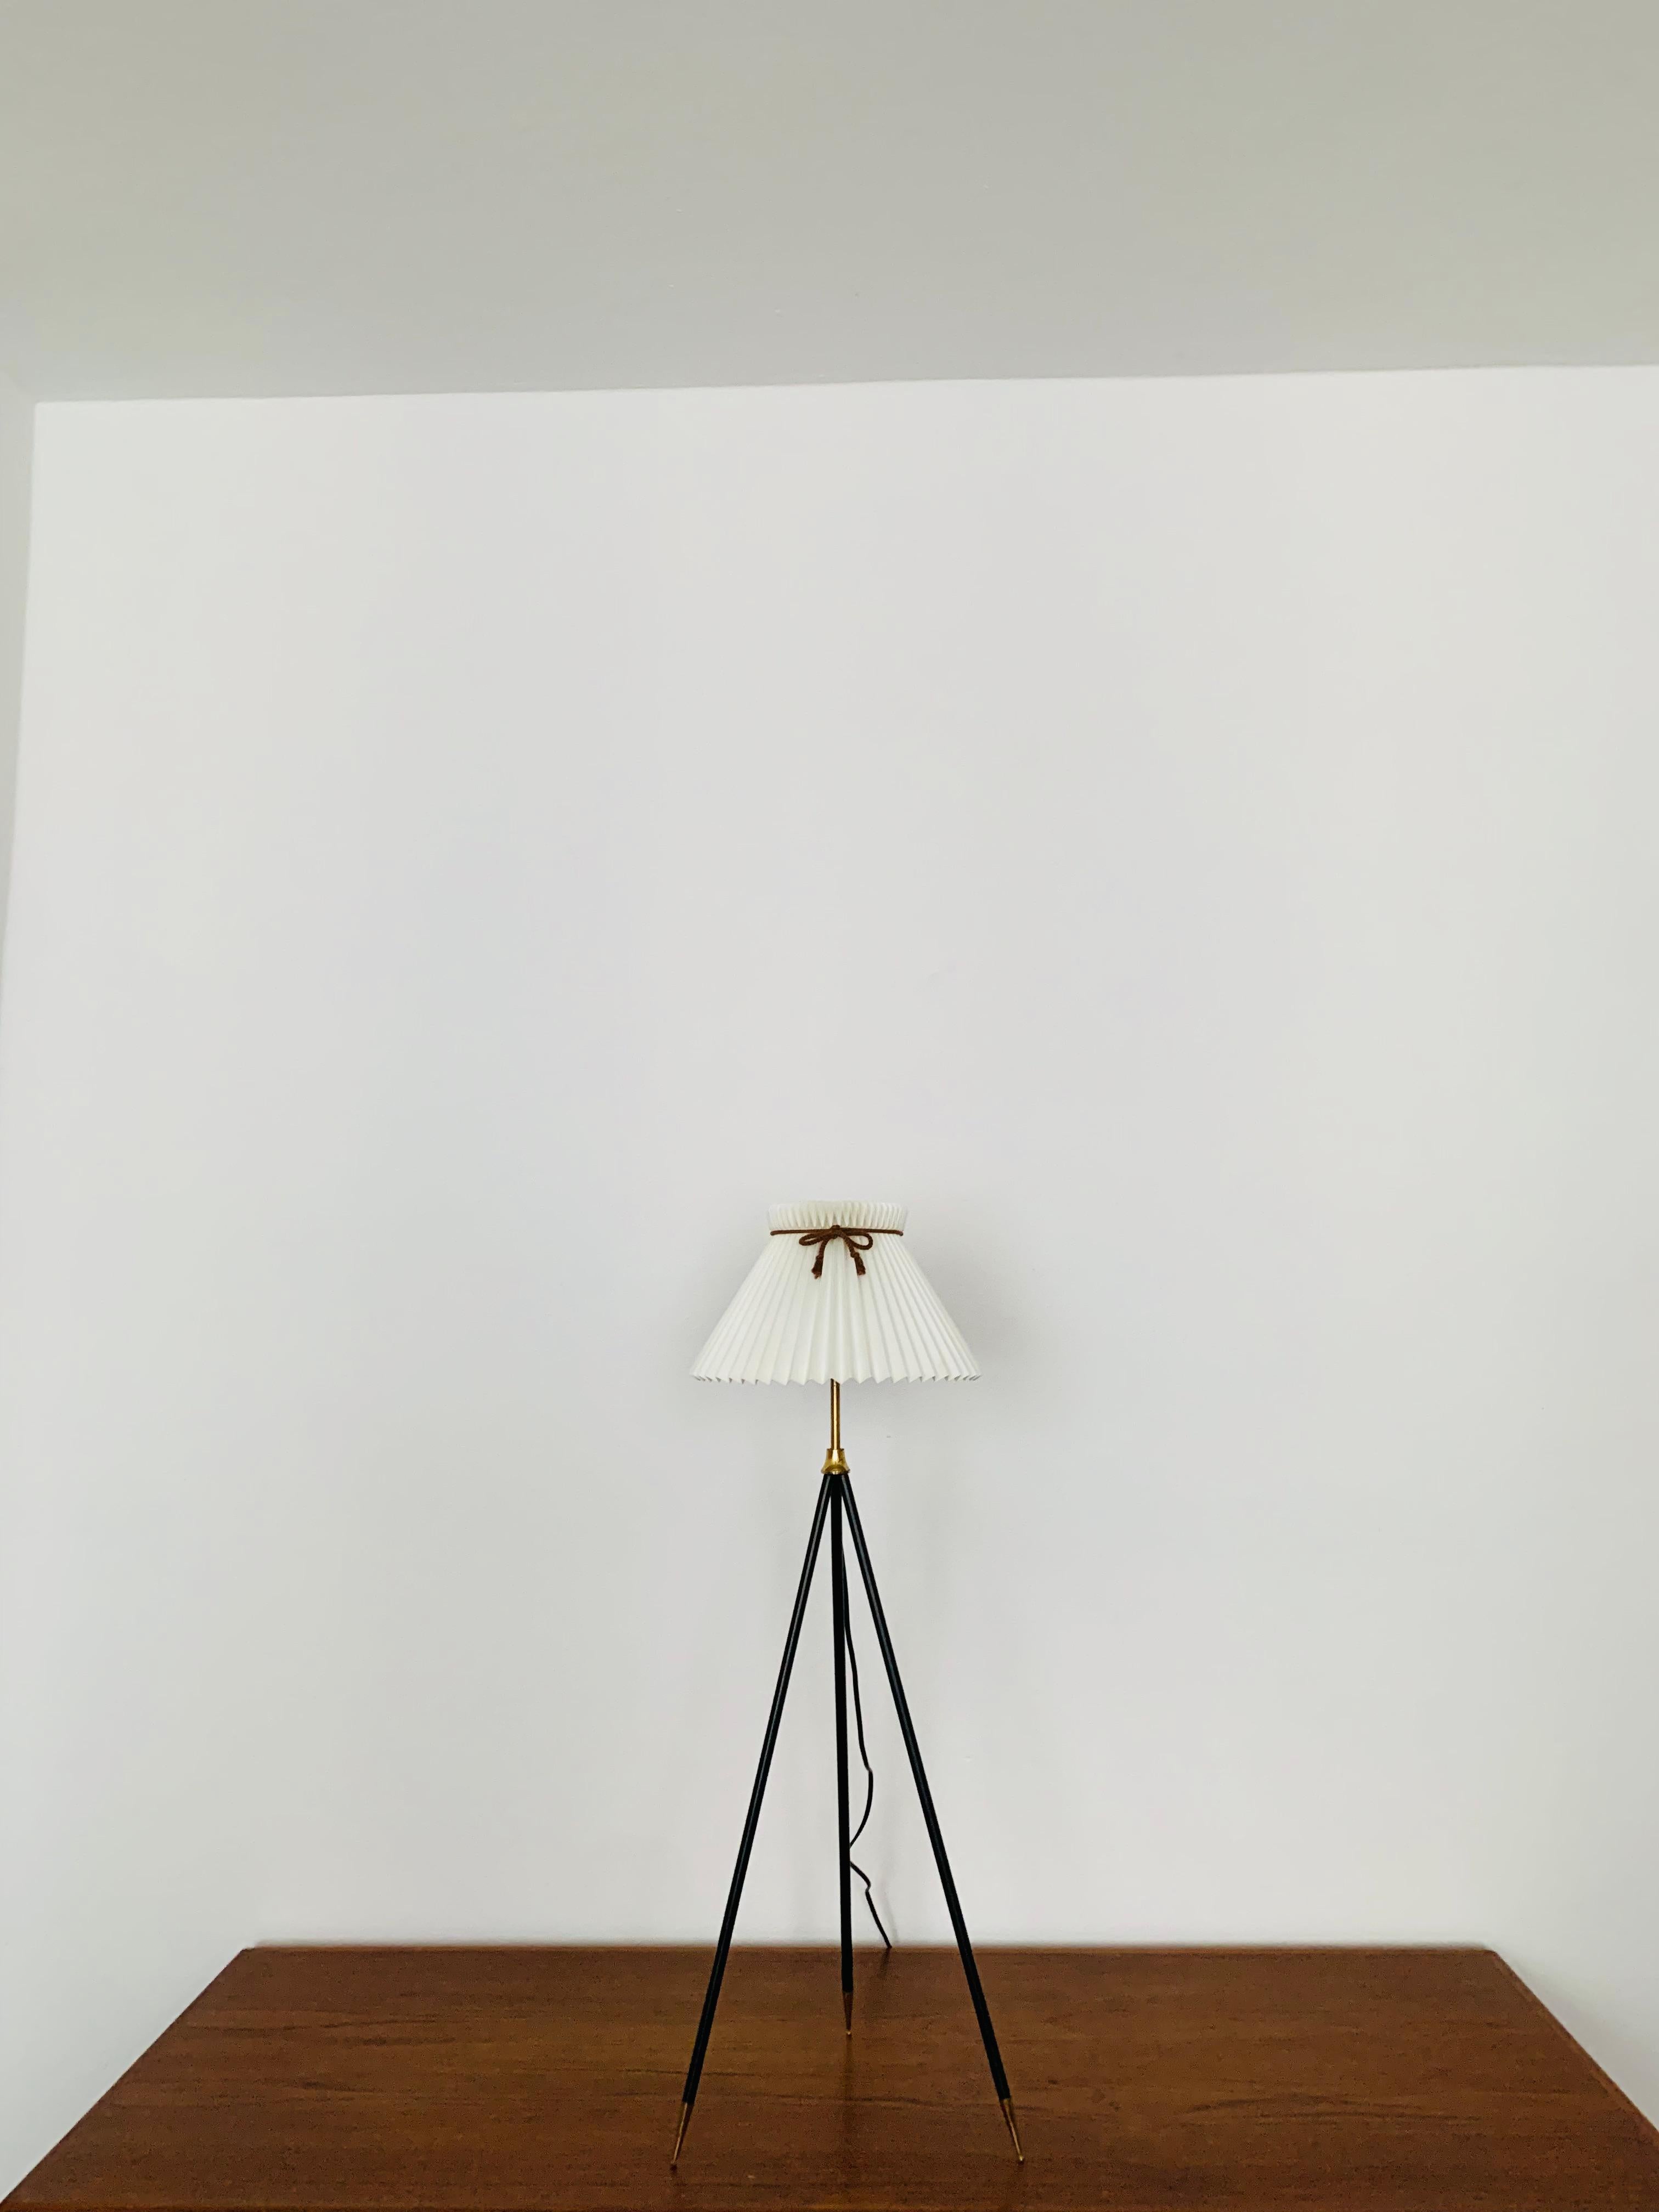 Very nice Danish floor or table lamp from the 1950s.
Wonderful and contemporary design.
A highlight for every room.

Manufacturer: Le Klint
Design: Kaare Klint

Condition:

Very good vintage condition with minimal signs of wear consistent with